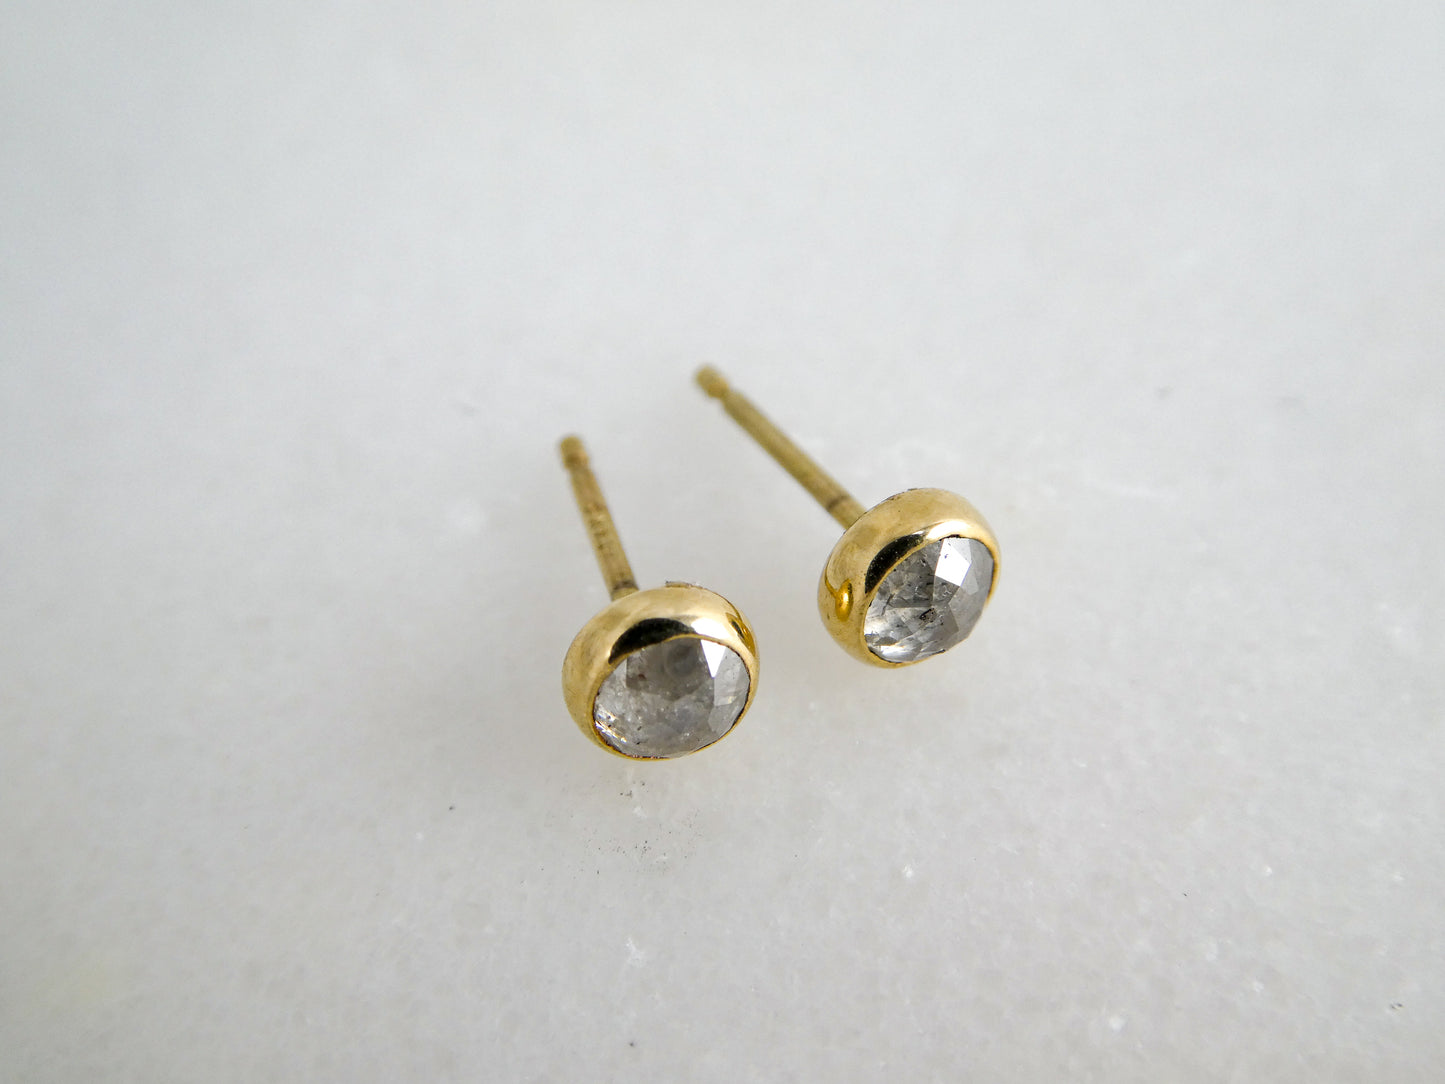 Ice White Rose-Cut Diamond Studs in 14k Yellow Gold Bezels, 0.64 carat and Ready to Ship